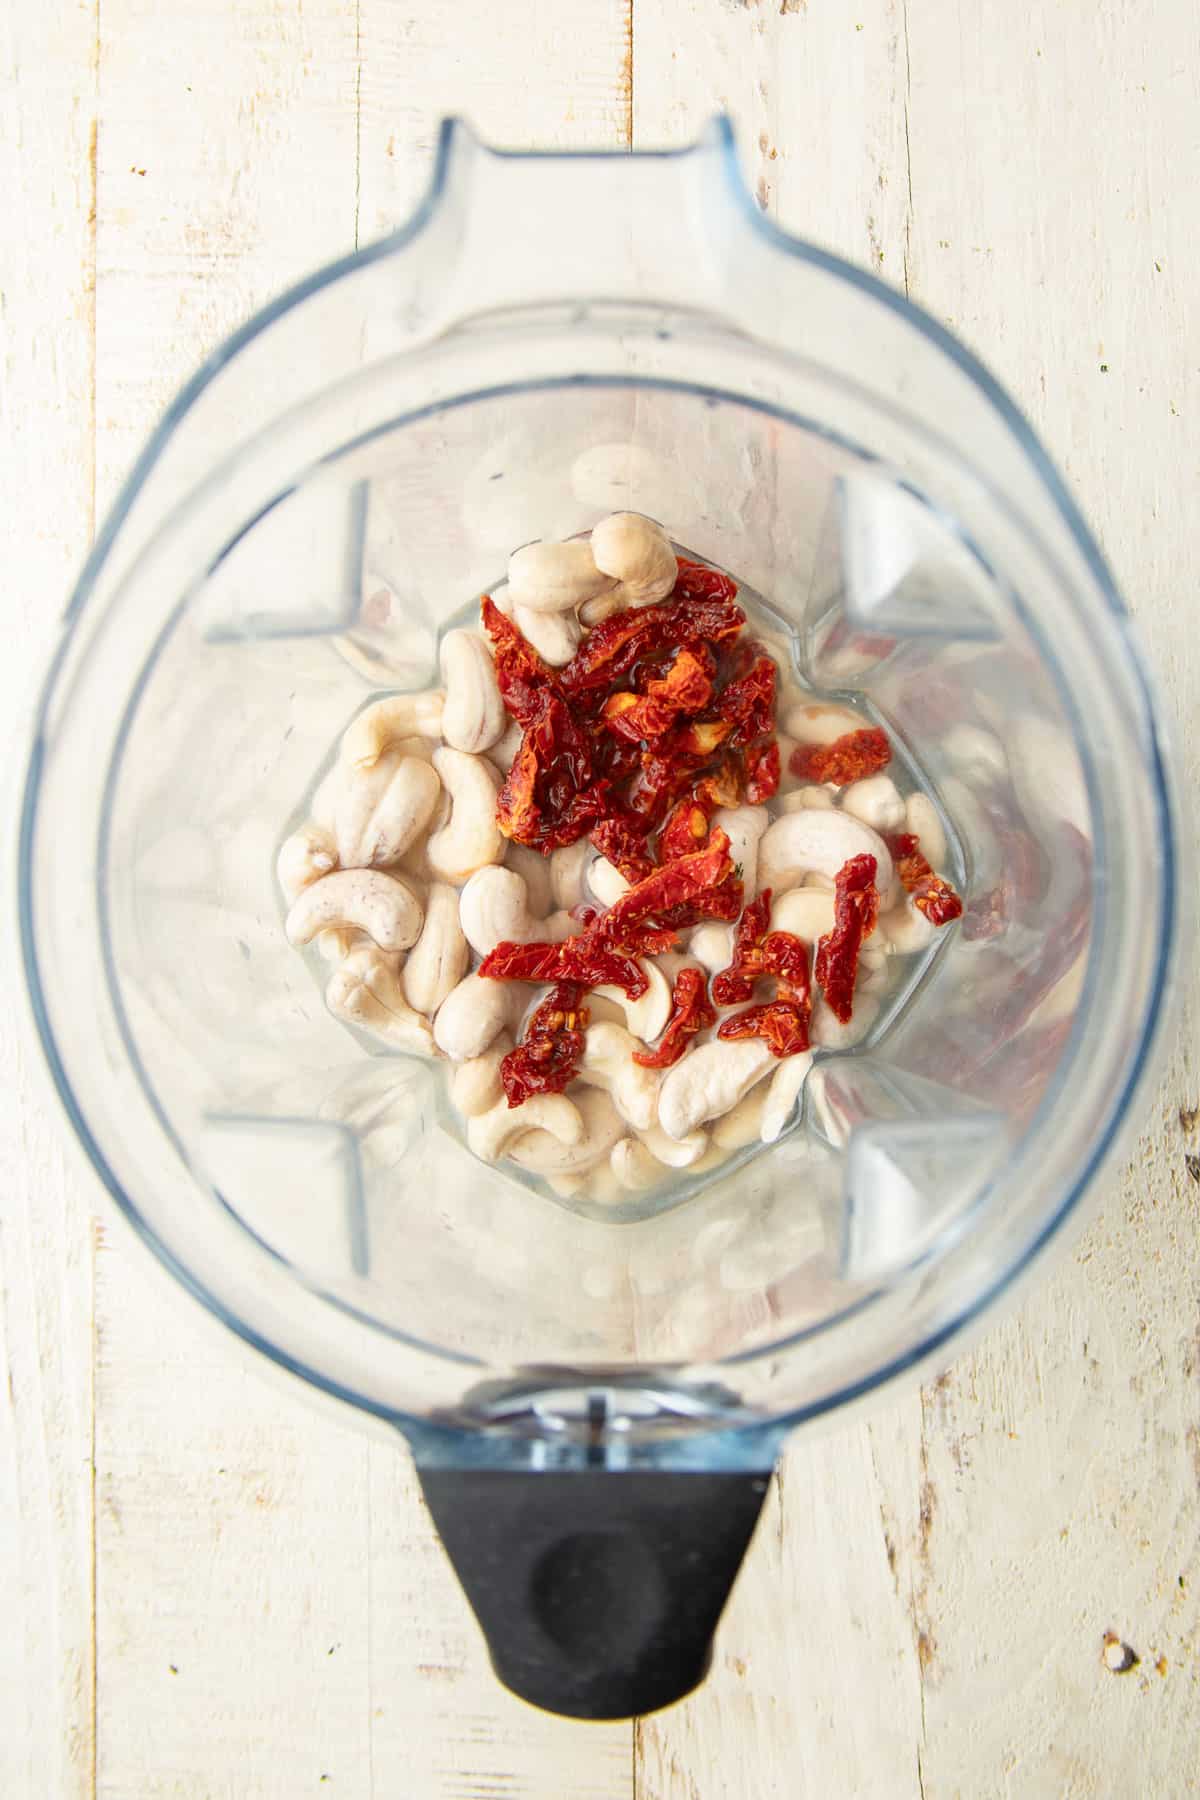 Cashews and sundried tomatoes in liquid in a blender.